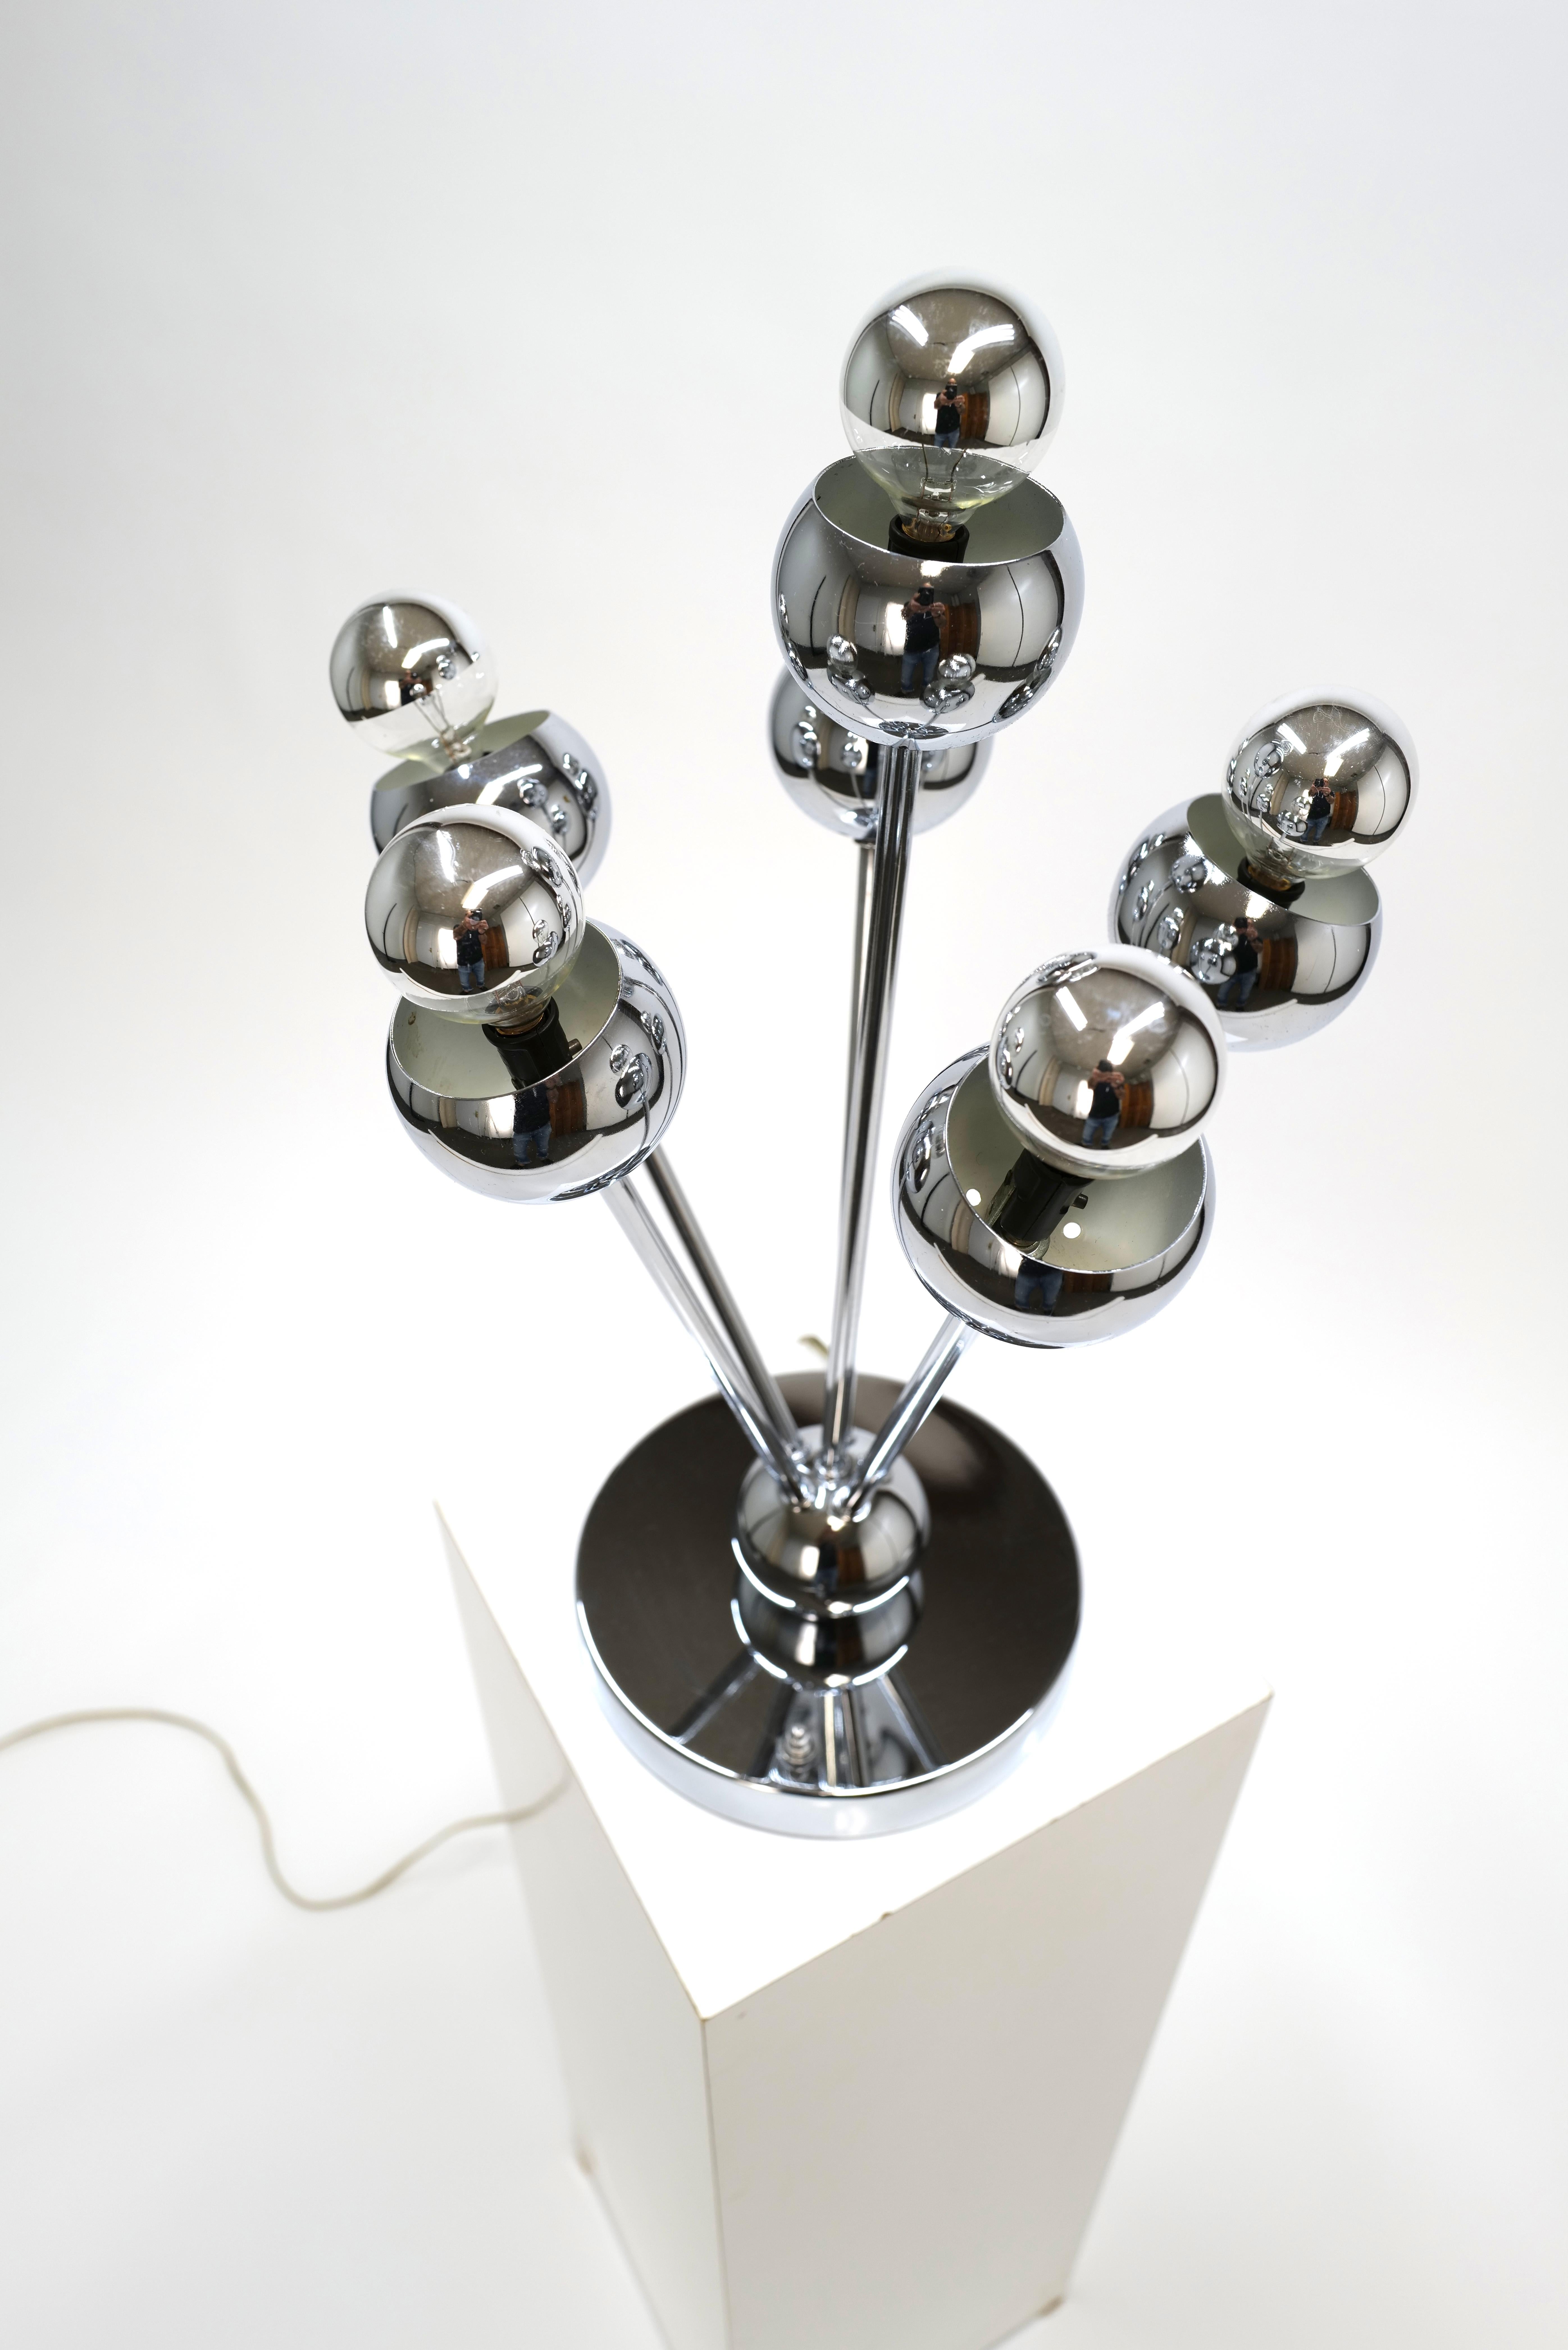 The Chrome Five Head Sputnik Table Lamp by Torino combines futuristic design with functional lighting. With its sleek chrome finish and distinctive five-head configuration resembling the iconic Sputnik satellite, this lamp adds a touch of modern